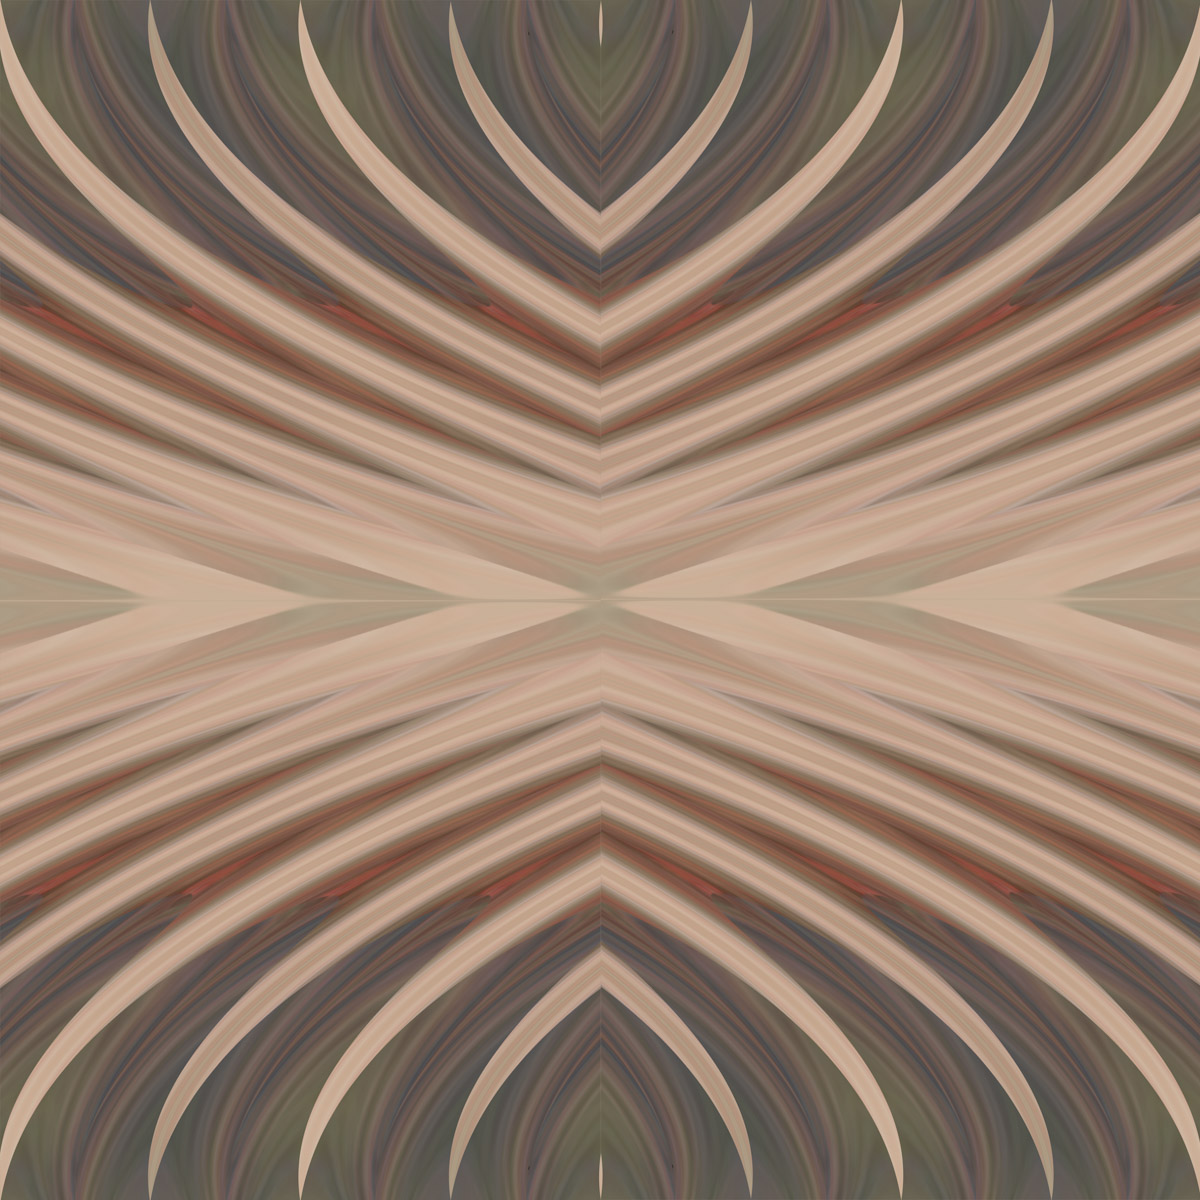 A brown and beige abstract pattern with a cross.